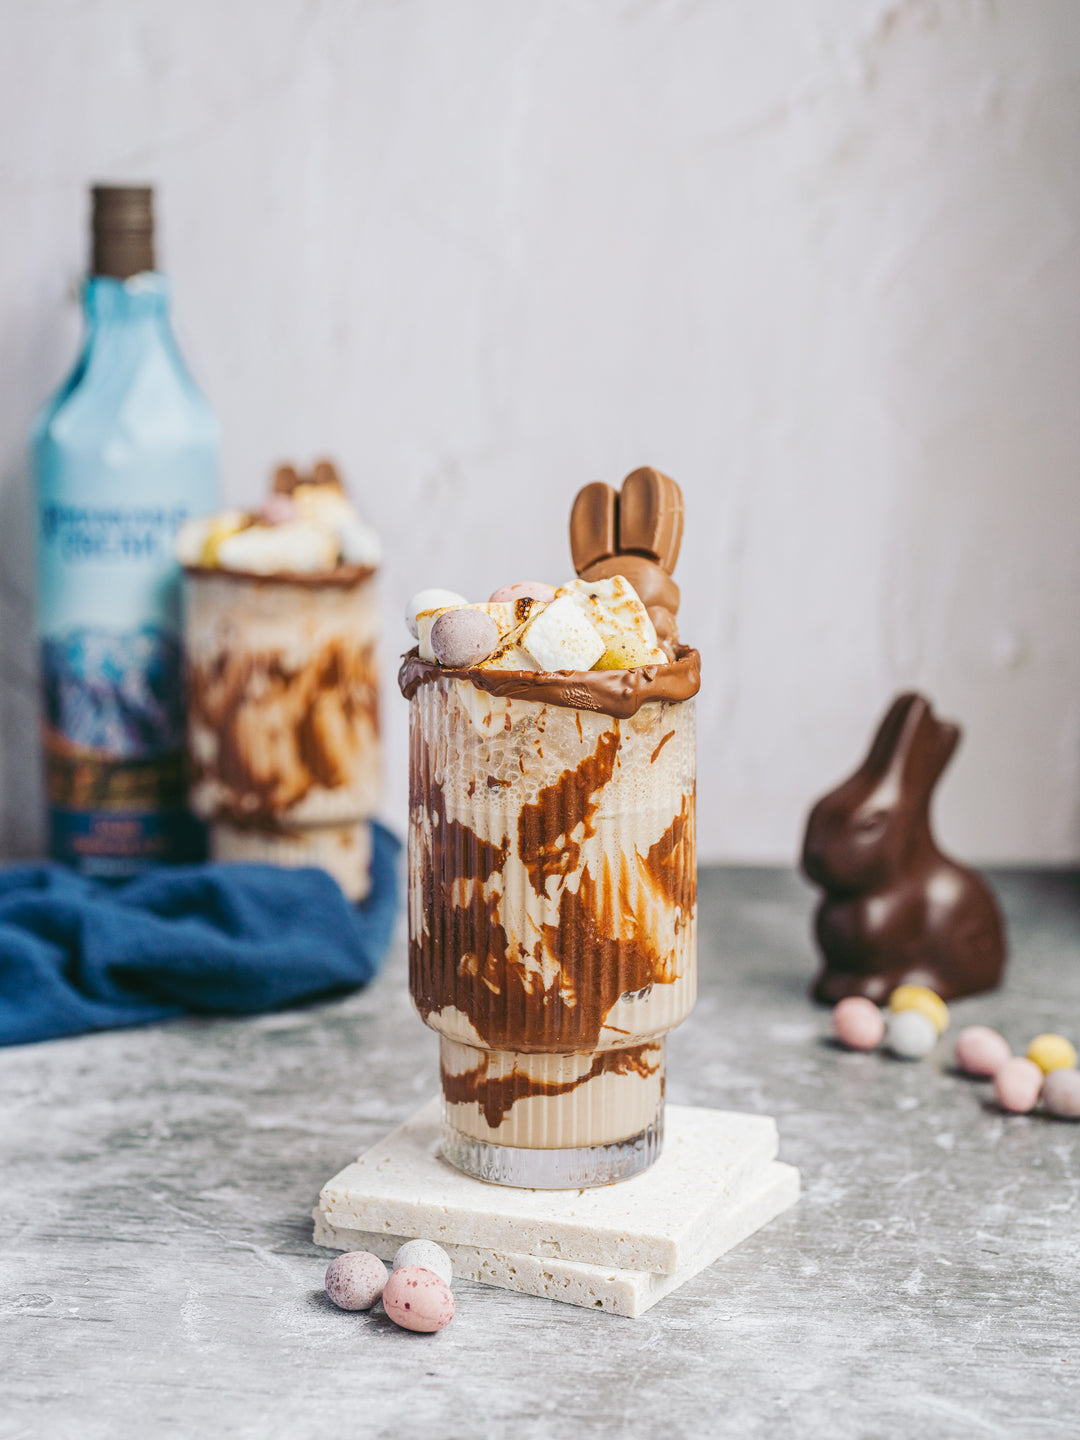 Remarkable Easter Choco-Tini